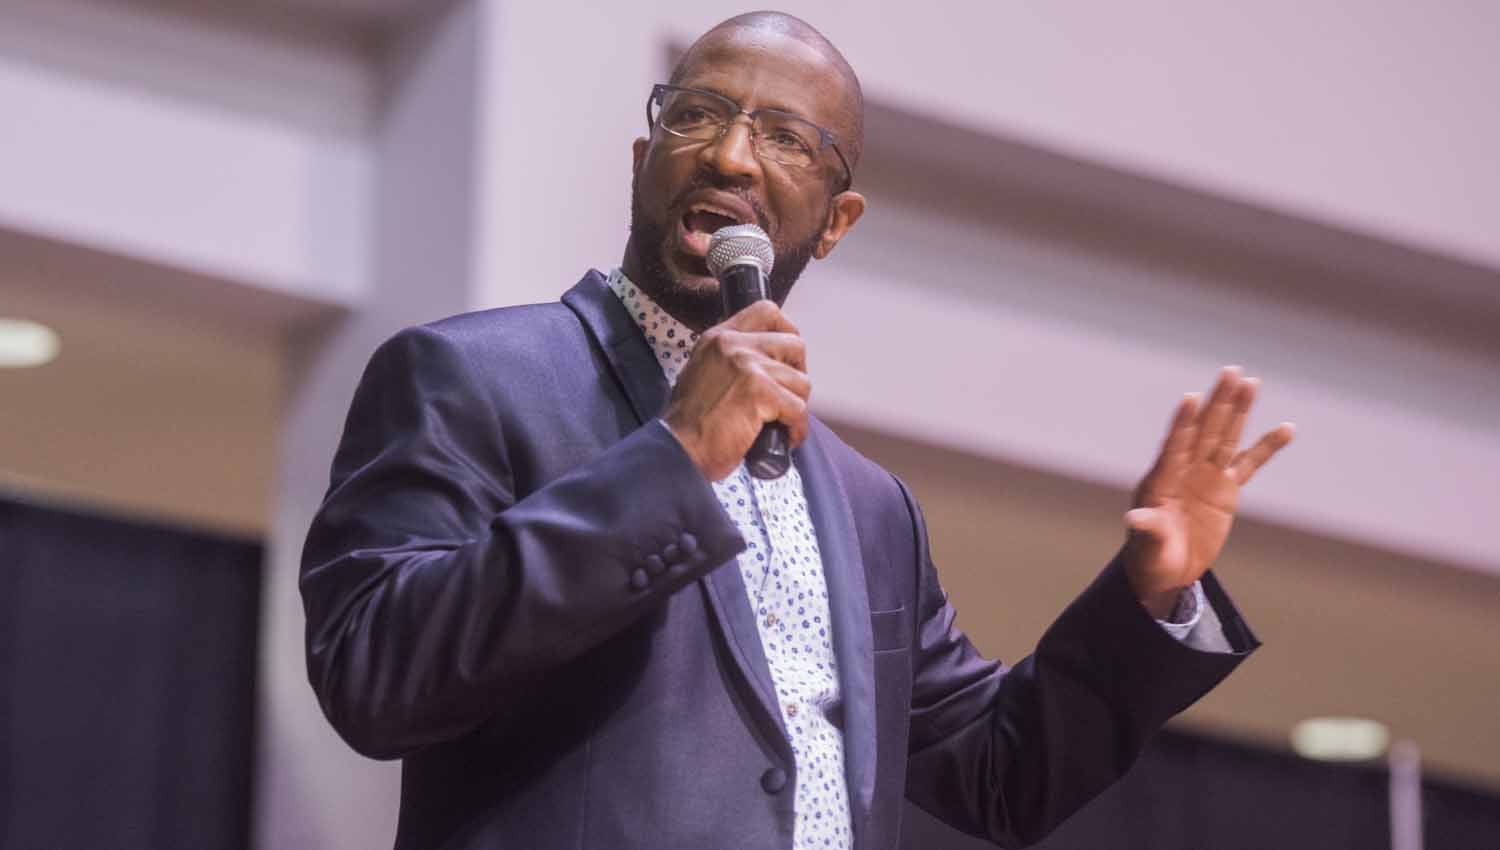 Comedian Rickey Smiley kicked off the 16th Annual Leadership Conference Friday night on the campus of Troy University.